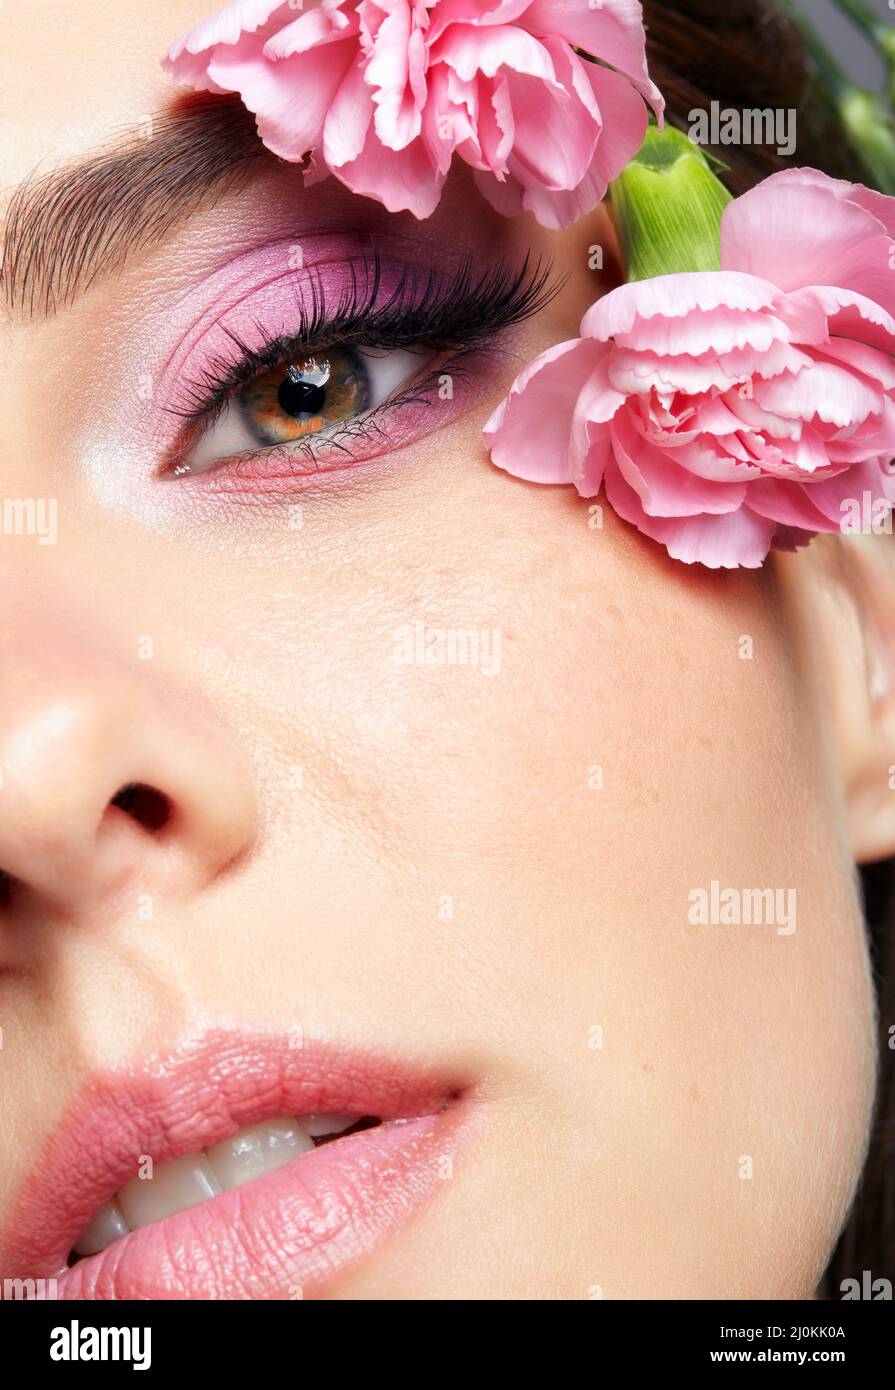 Closeup portrait of female face with pink beauty makeup and carnation flowers on the temple. Stock Photo